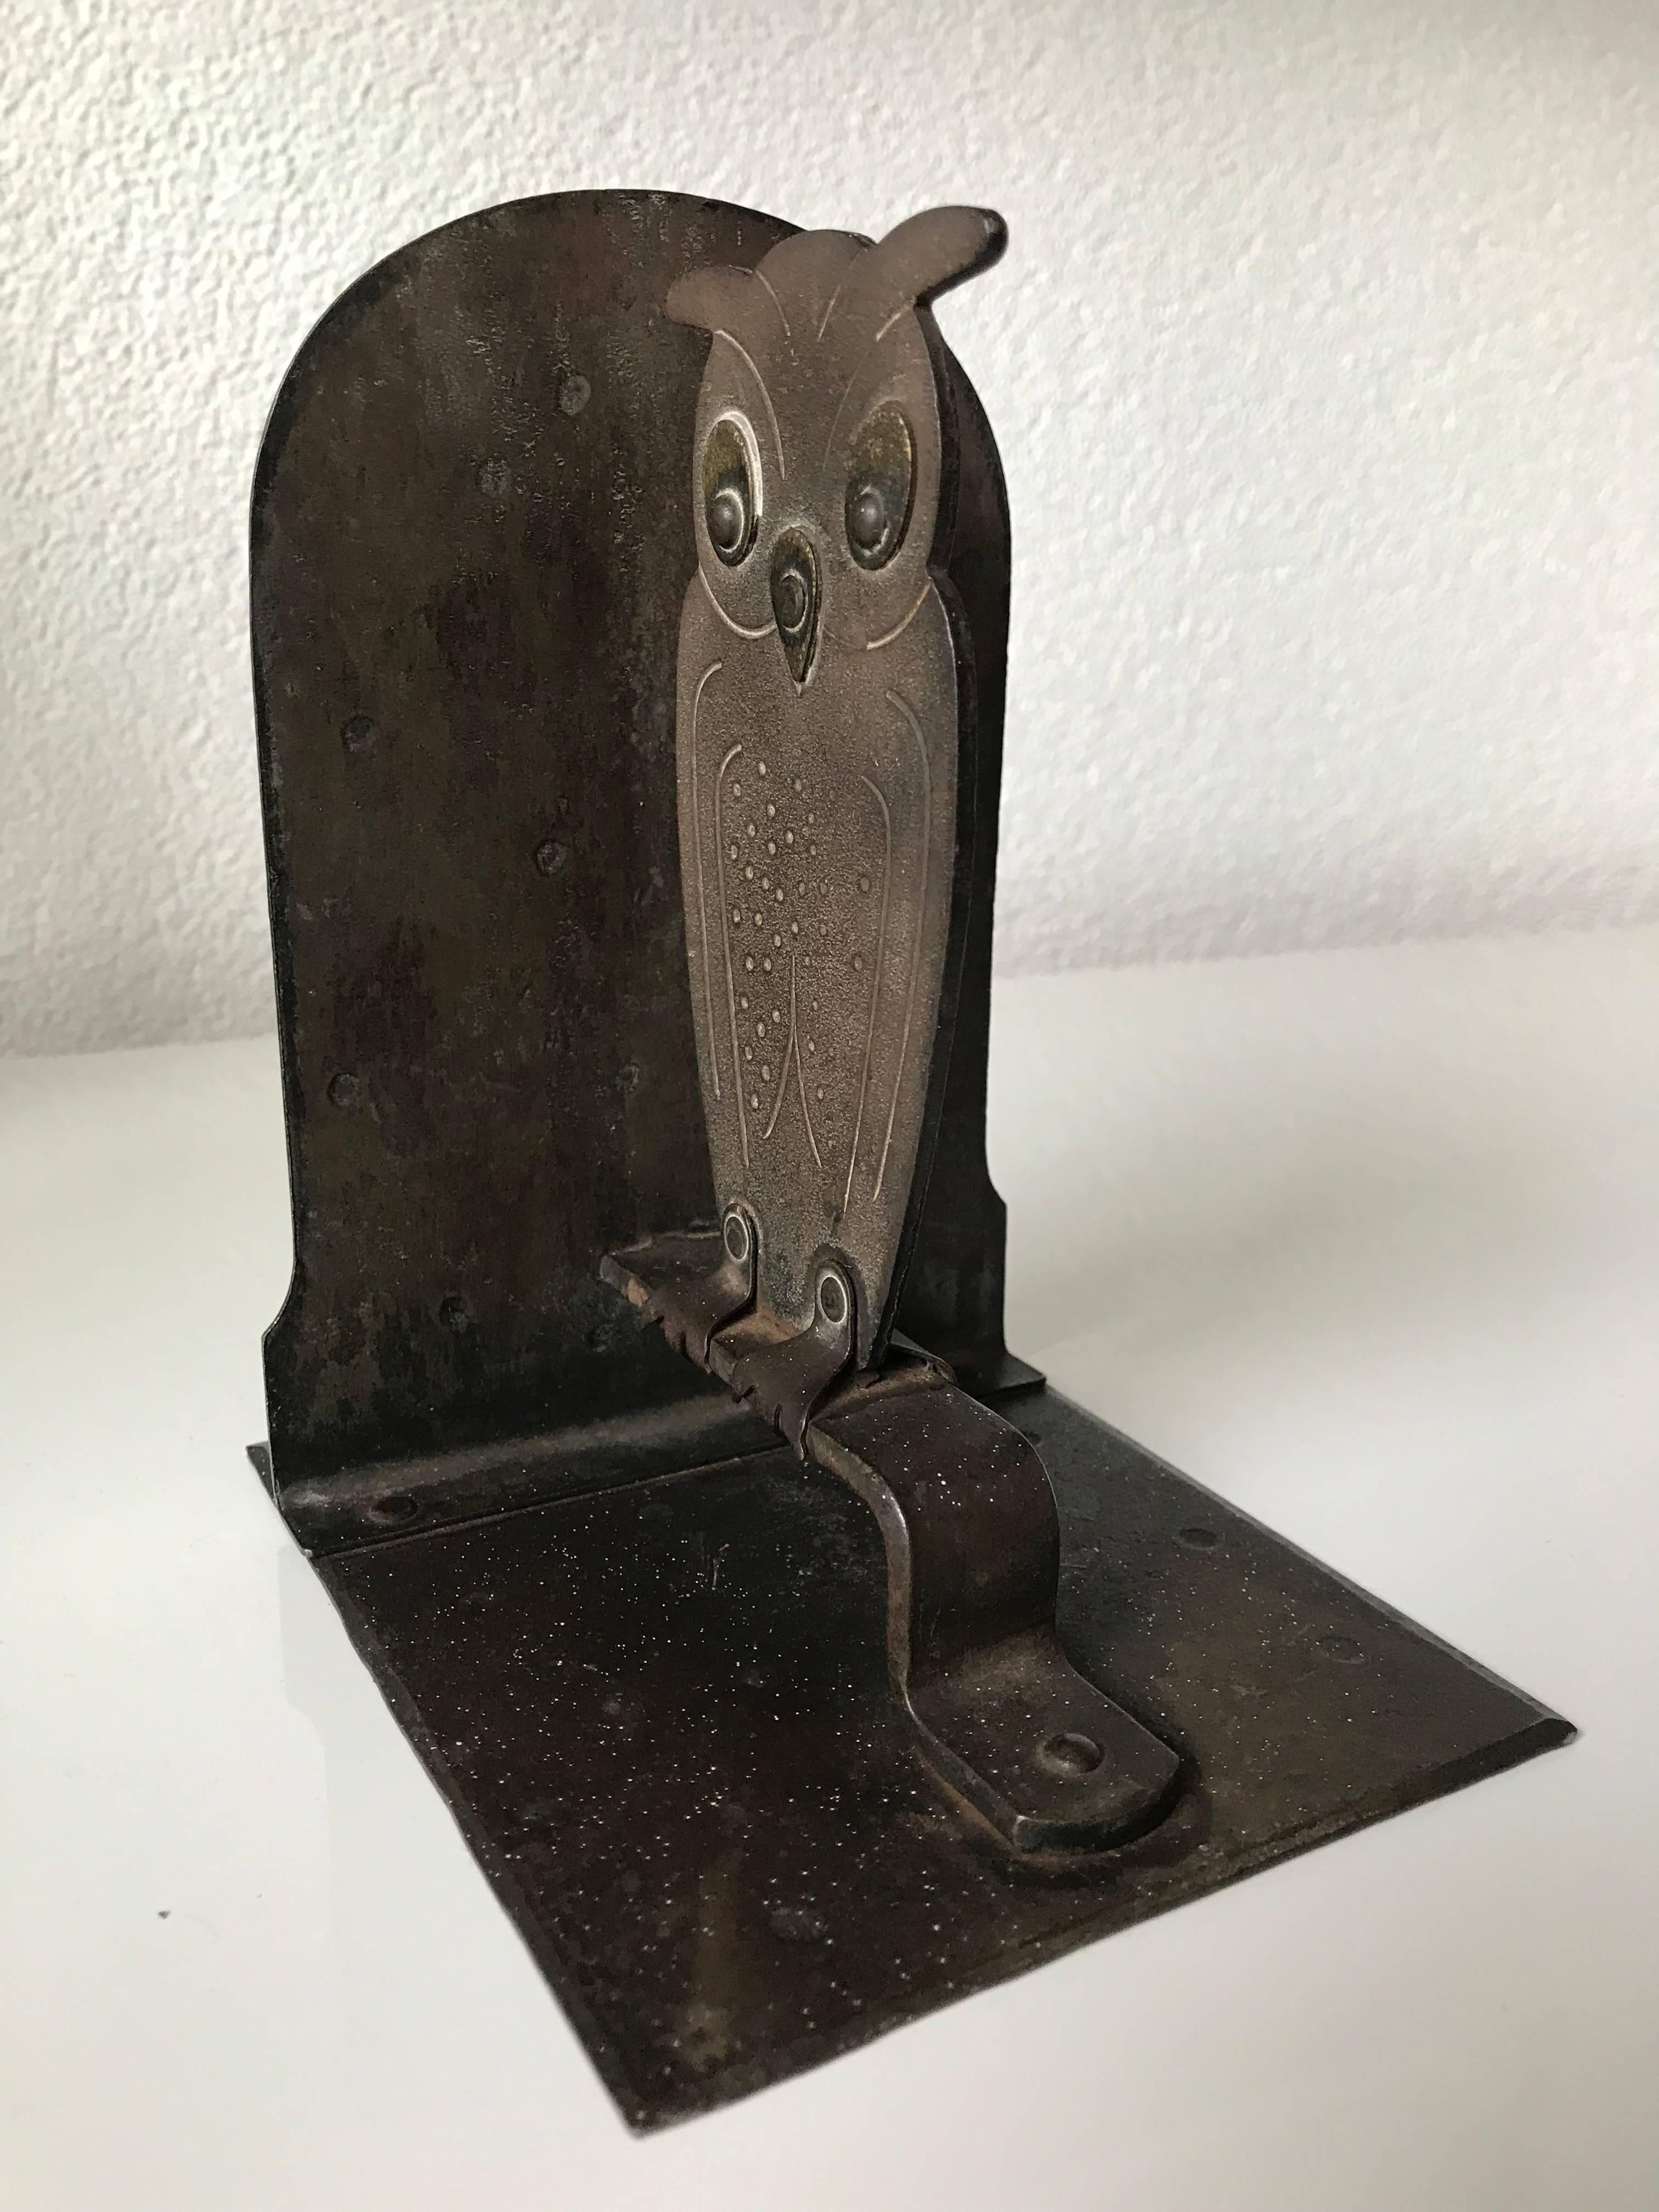 20th Century Vintage 1920s Hammered Metal Owl Bookend by Goberg, Hugo Berger, Germany